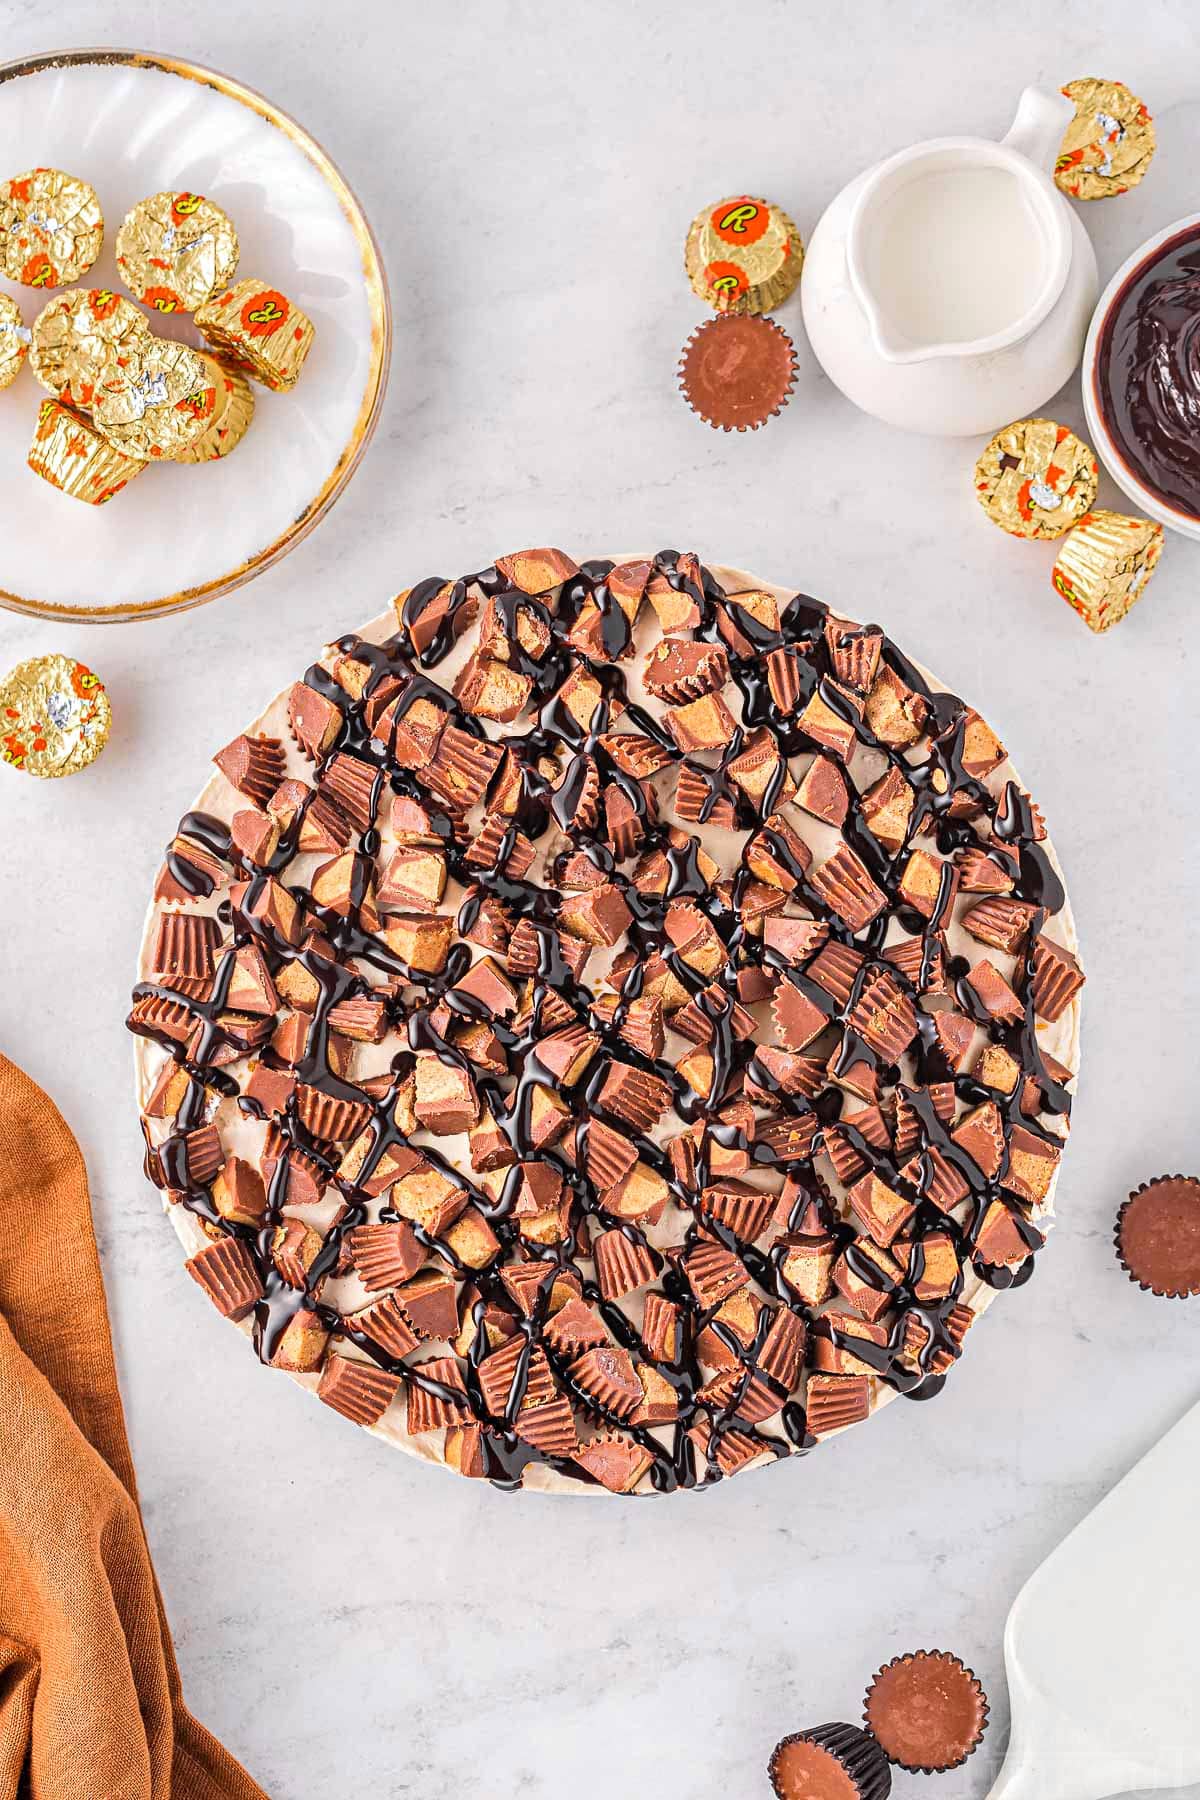 top down look at whole peanut butter cheesecake ready to be sliced and enjoyed. topped with reeses and hot fudge.